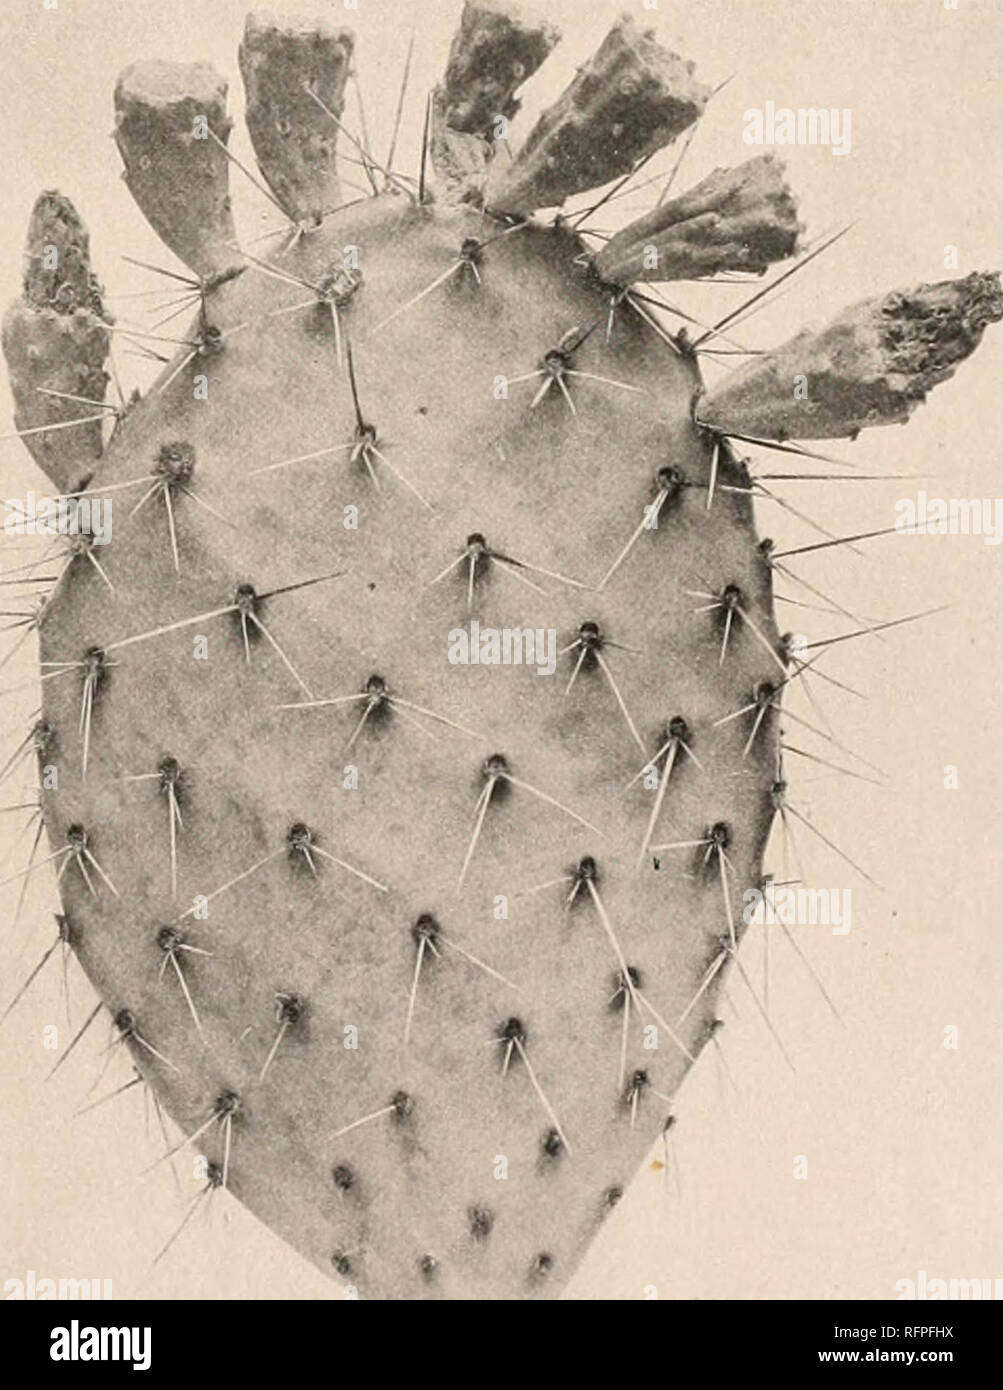 . Carnegie Institution of Washington publication. FIG. 183.—Opuntia covillei. Xo-4- Type locality: On the Mojave, west California. Distribution: Known only from the type locality. The fragmentary type speci- men has been examined; we have been unable to refer any other specimens to this species, which is thus very imperfectly under- stood. Illustration: Pac. R. Rep. 4: pi. 9, f. 6 to 8. 147. Opuntia covillei Britton and Rose, Smiths. Misc. Coll. 50: 532. 1908. Opunlia megacarpa Griffiths. Rep. Mo. Bot. Card. 20: 91. 1909. Opuntia ntgosa Griffiths, Proc. Biol. Soc. Washington 27: 27. 1914. Bush Stock Photo